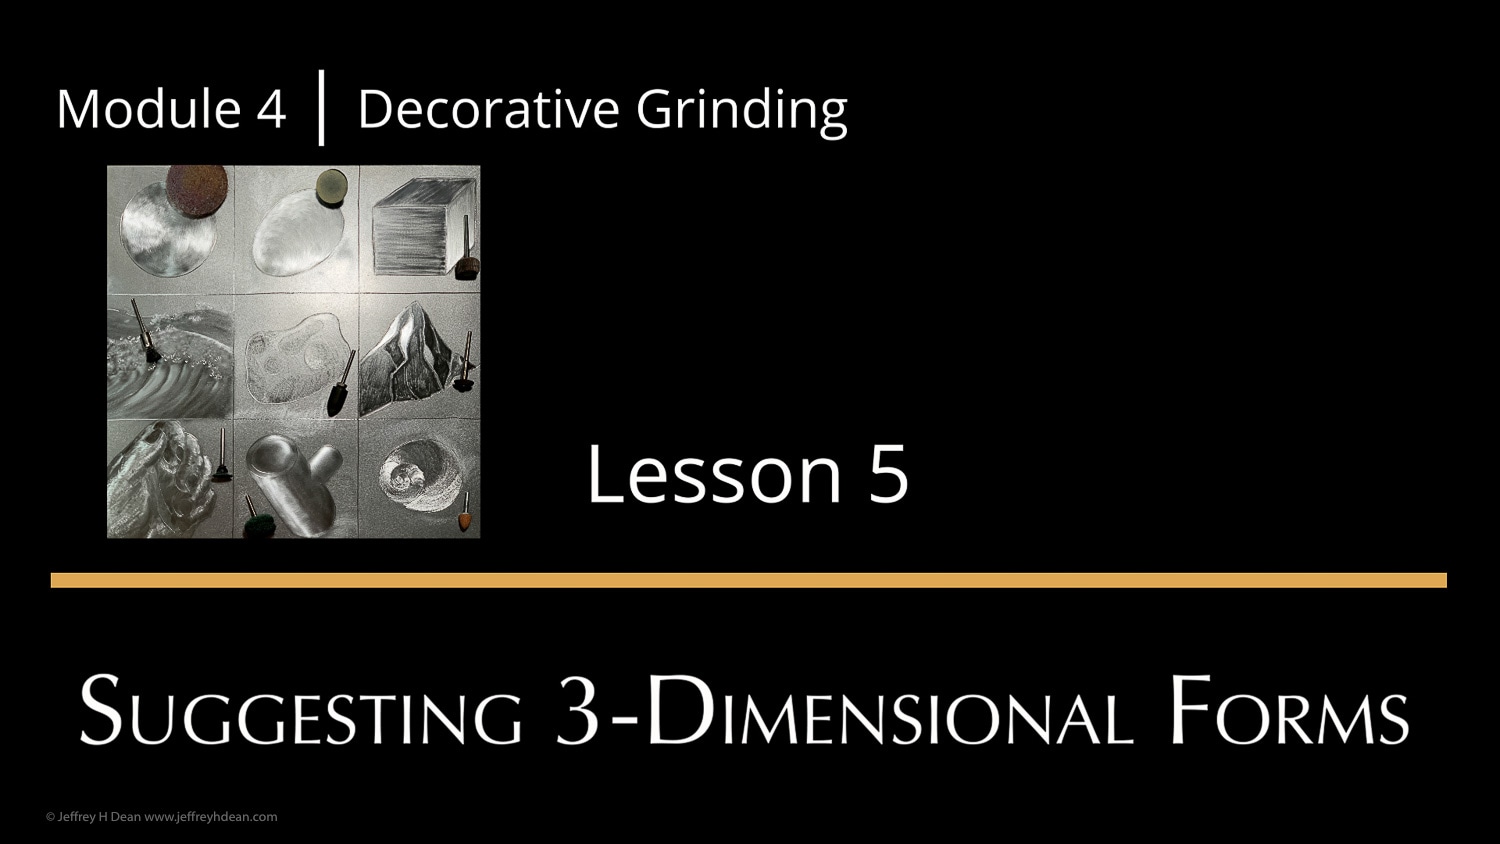 Suggesting 3-dimensional forms with decorative grinding patterns